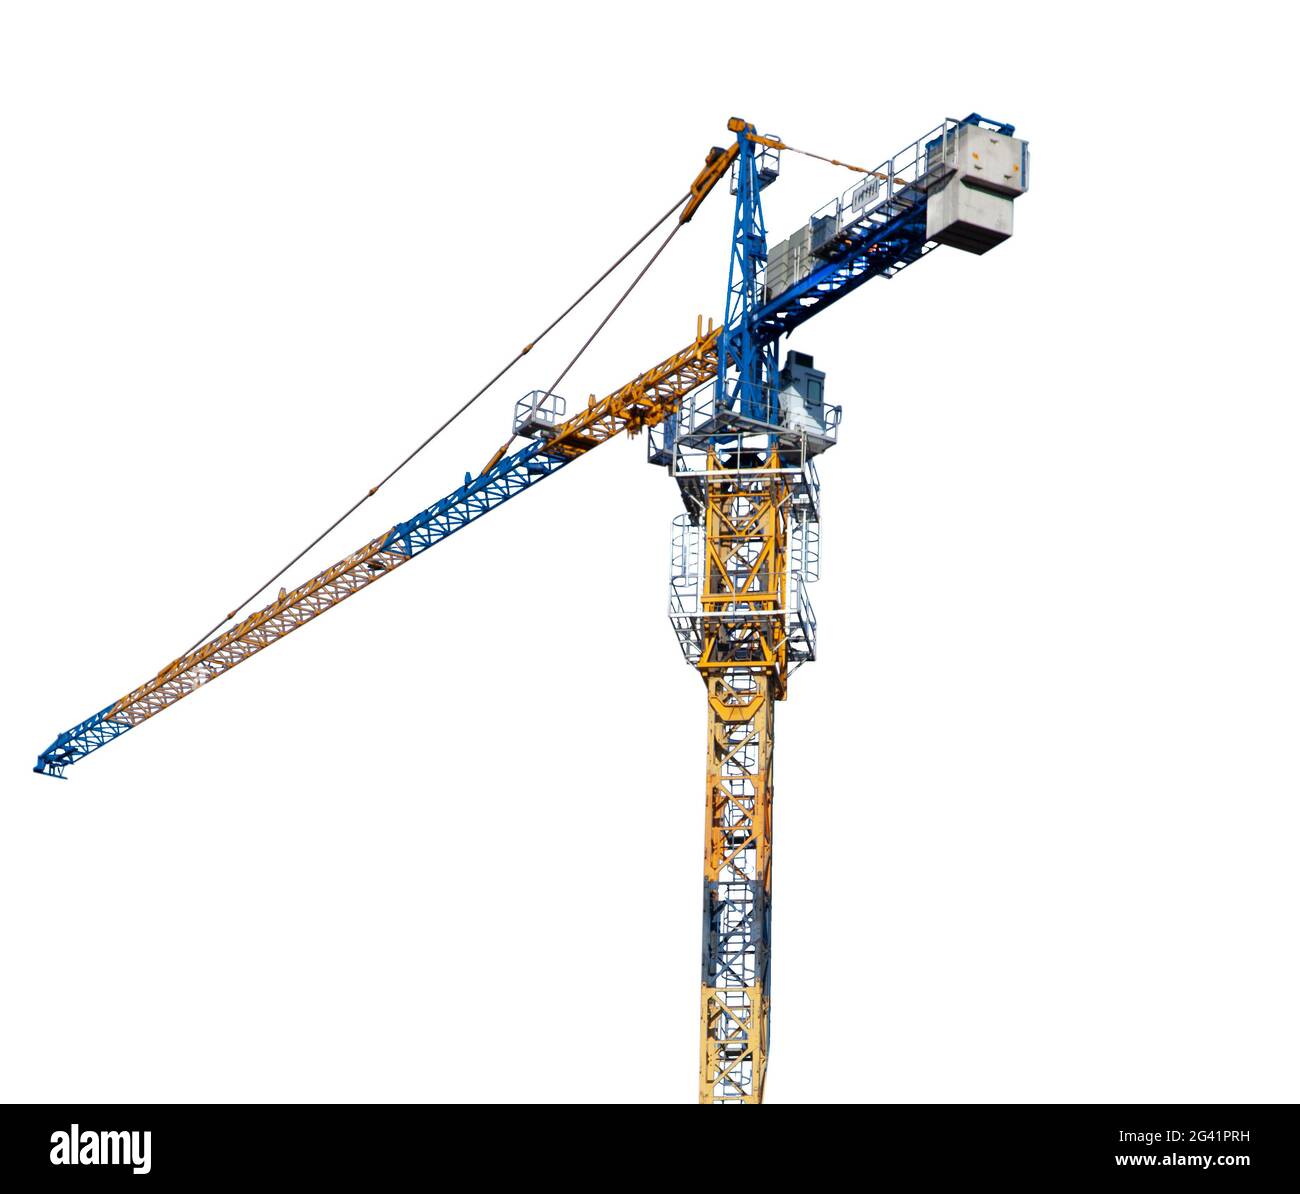 Hoisting crane isolated on white background. Demountable construction crane for moving heavy loads on a construction site. Stock Photo